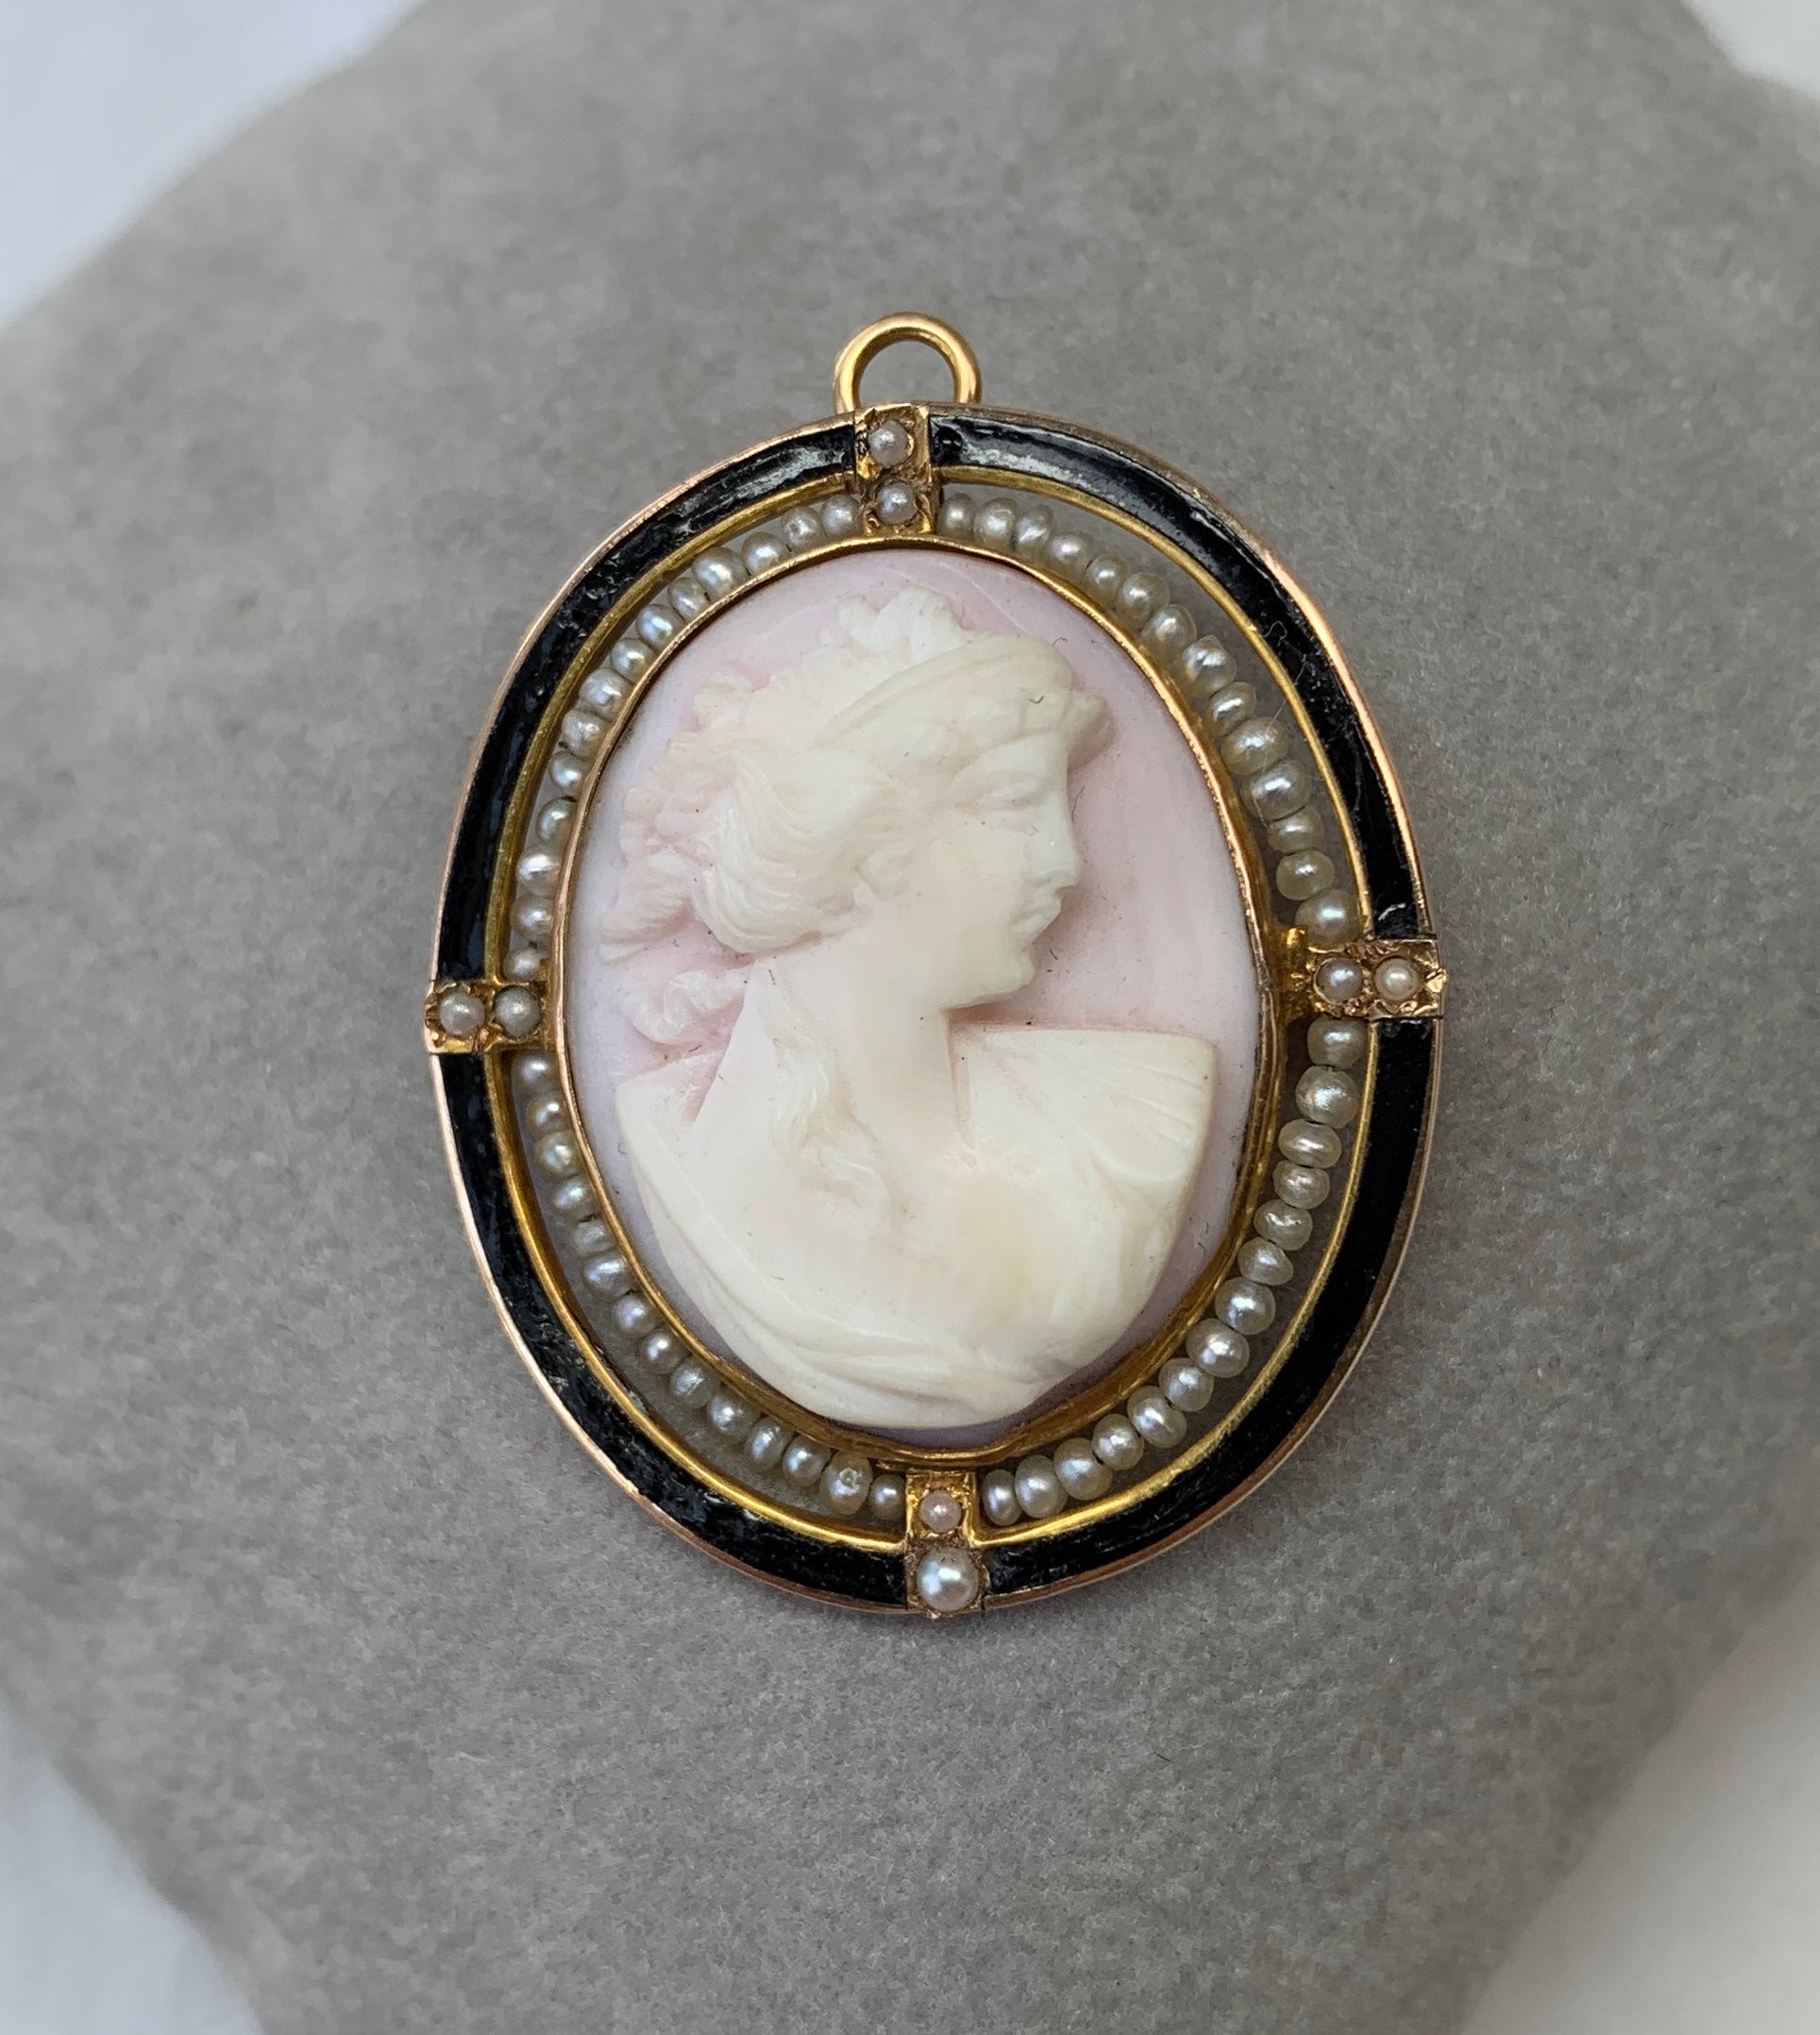 This is an absolutely stunning and very rare antique Victorian - Belle Epoque Pink and Angel Skin Coral Cameo Pendant or Brooch Pin with a hand carved image of a classical goddess woman set in a gorgeous 10 Karat Yellow Gold frame with a halo of